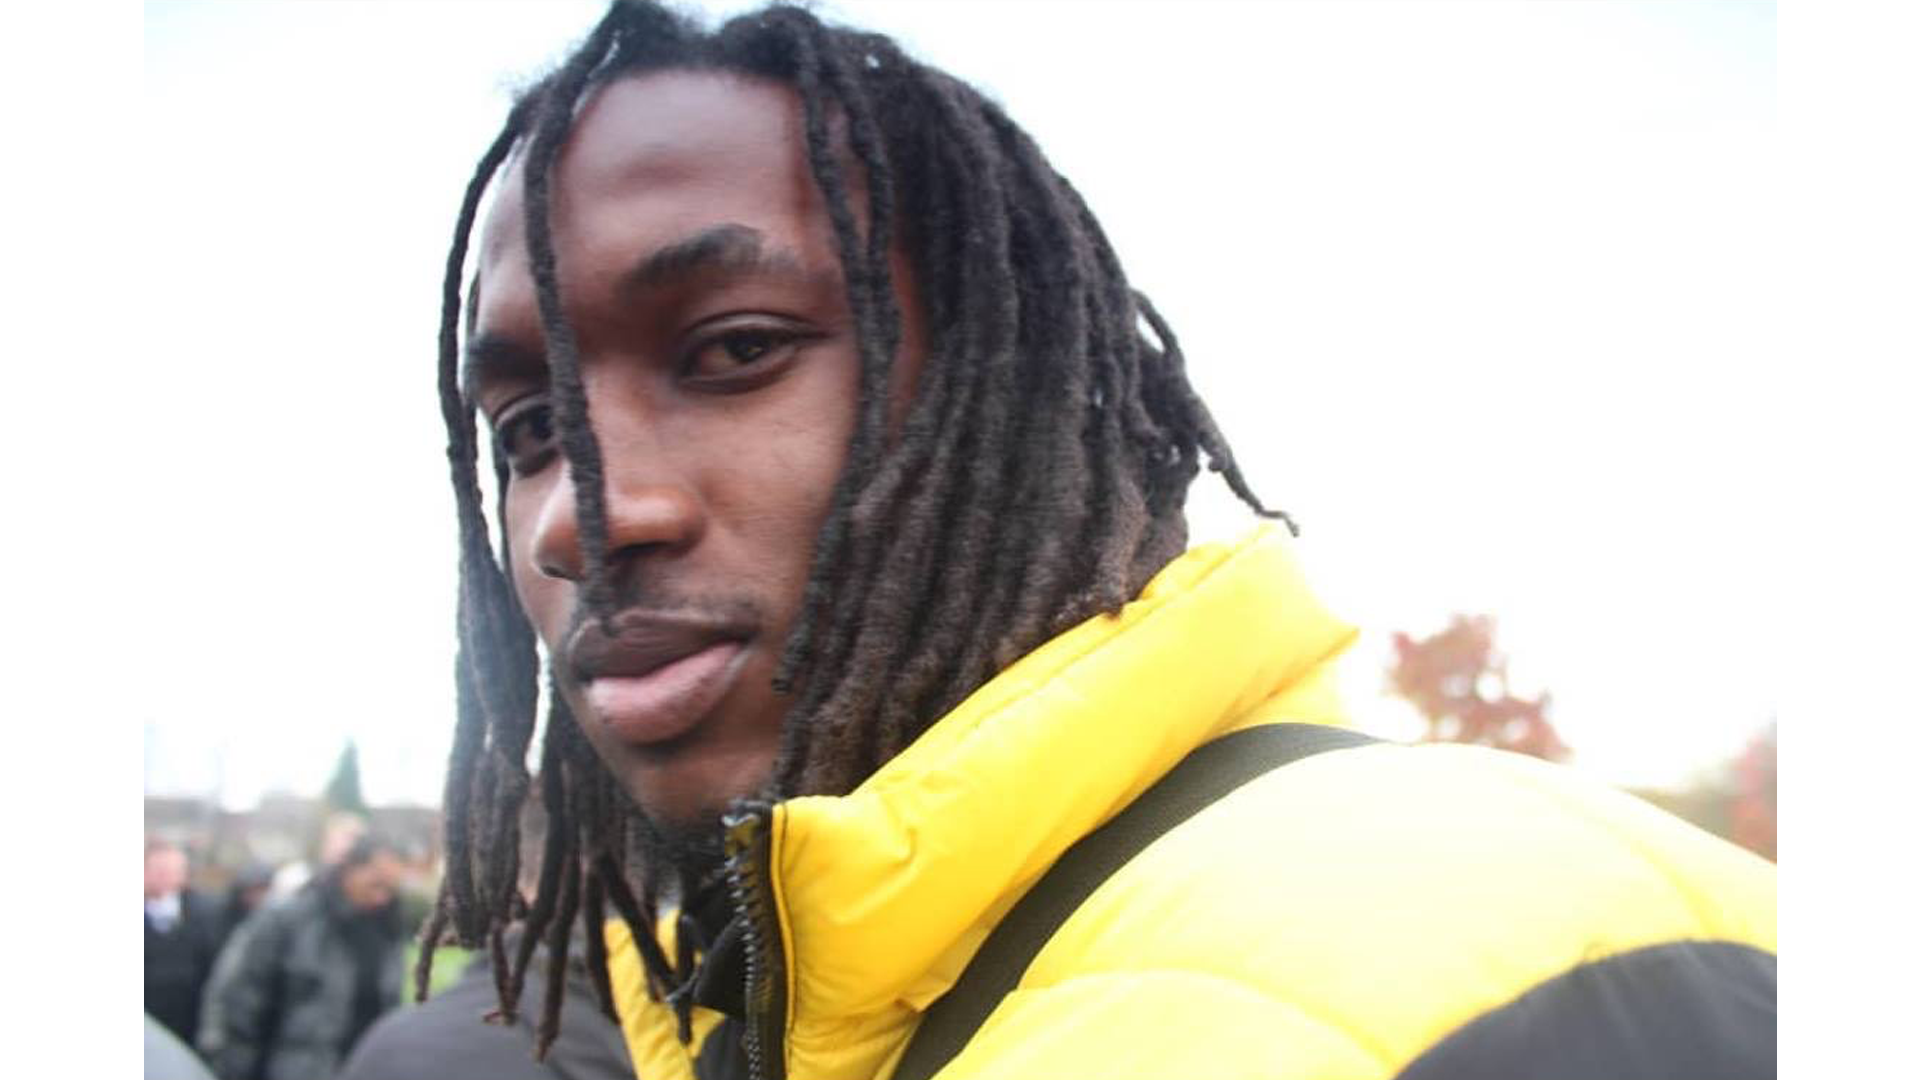 A man in dreadlocks and a yellow puffy jacket looks sideways on